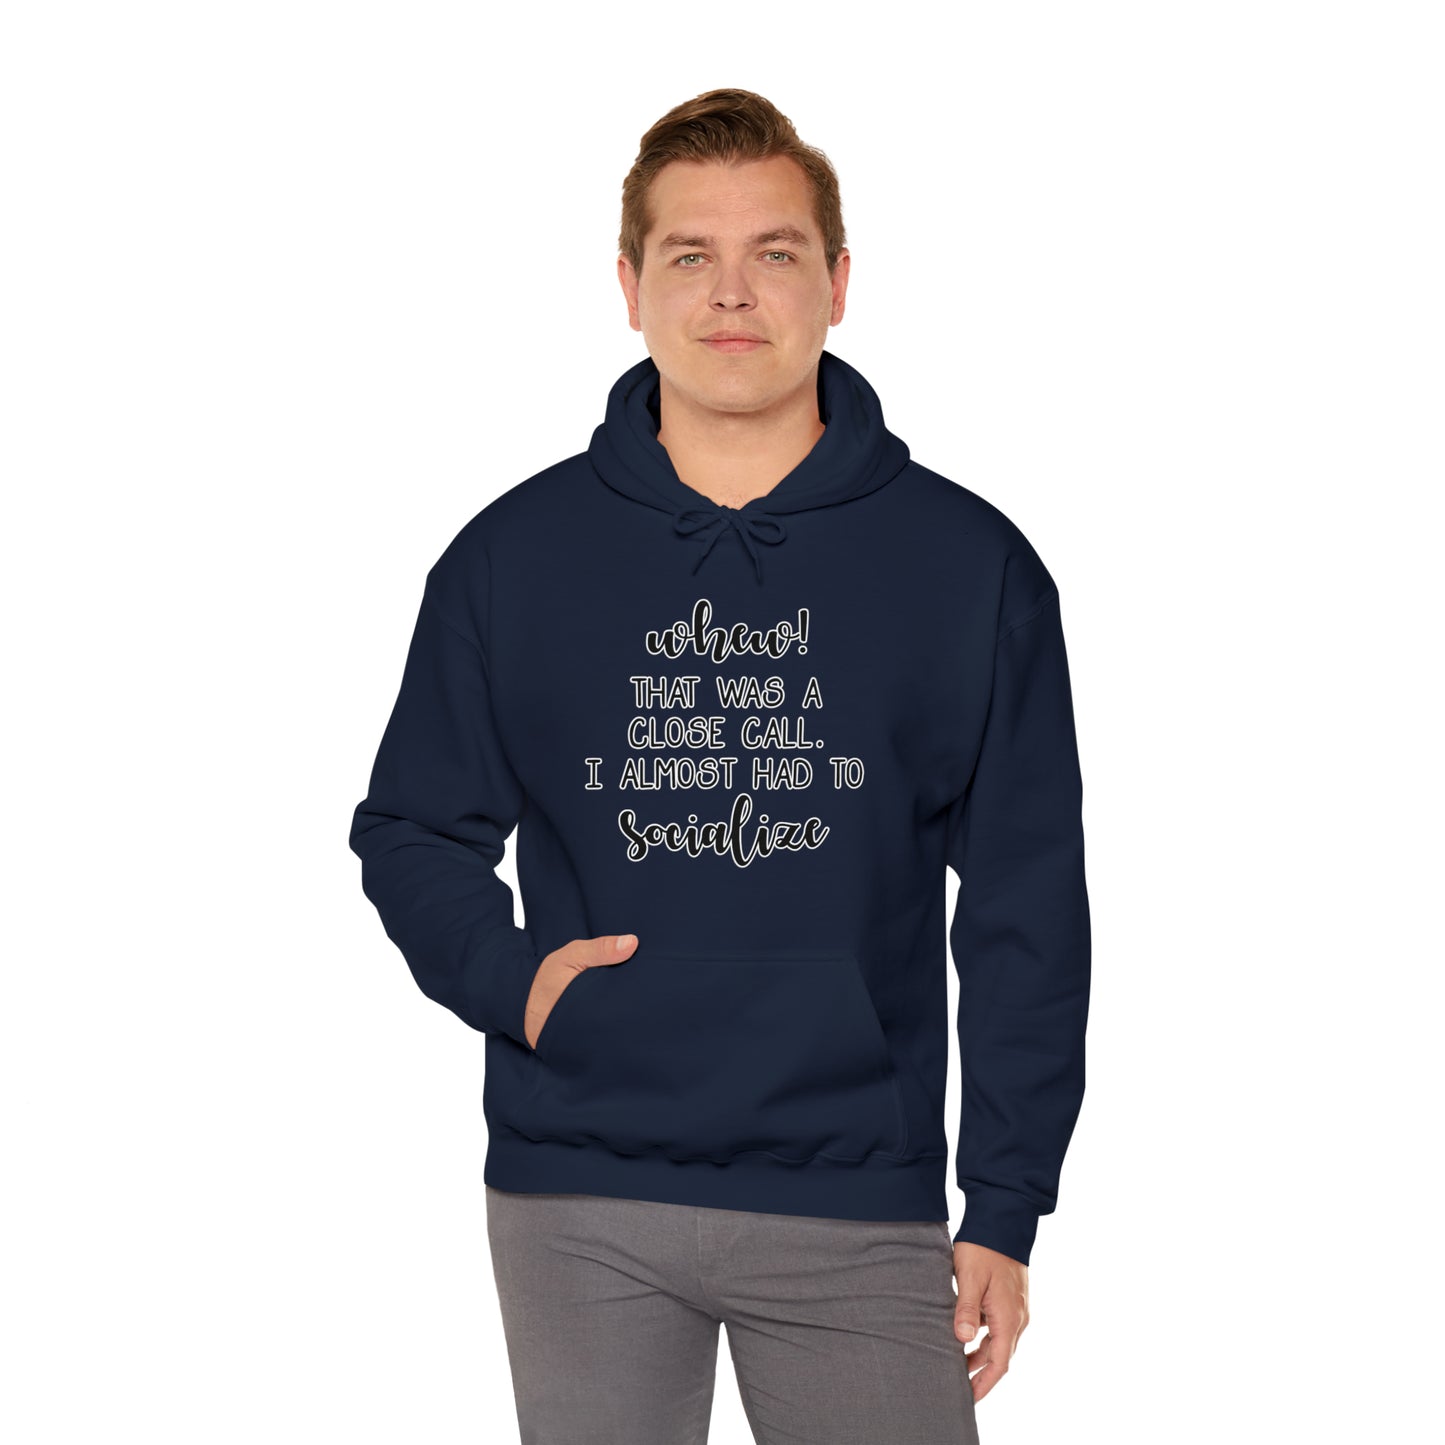 Whew, That Was A Close Call, I Almost Had To Socialize: Unisex Heavy Blend™ Hooded Sweatshirt